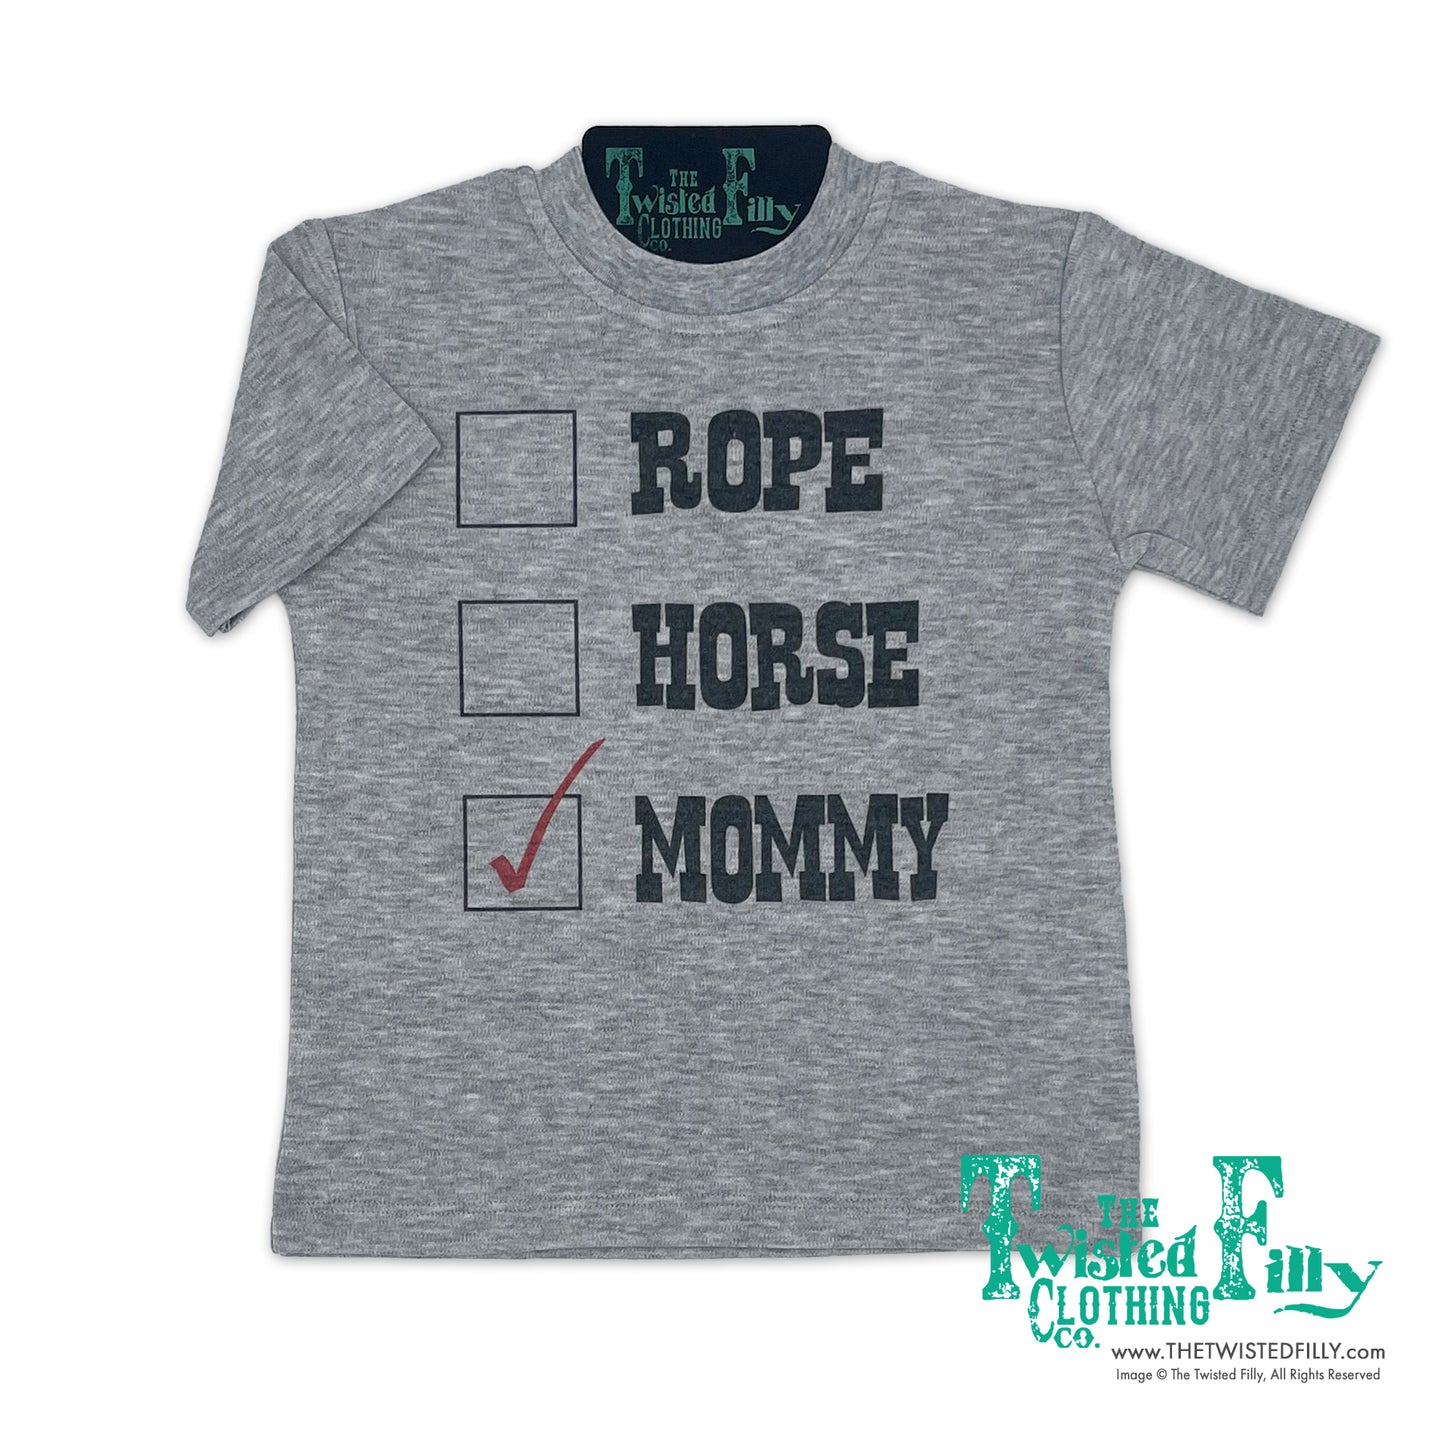 Rope Horse Mommy - S/S Toddler Tee - Gray